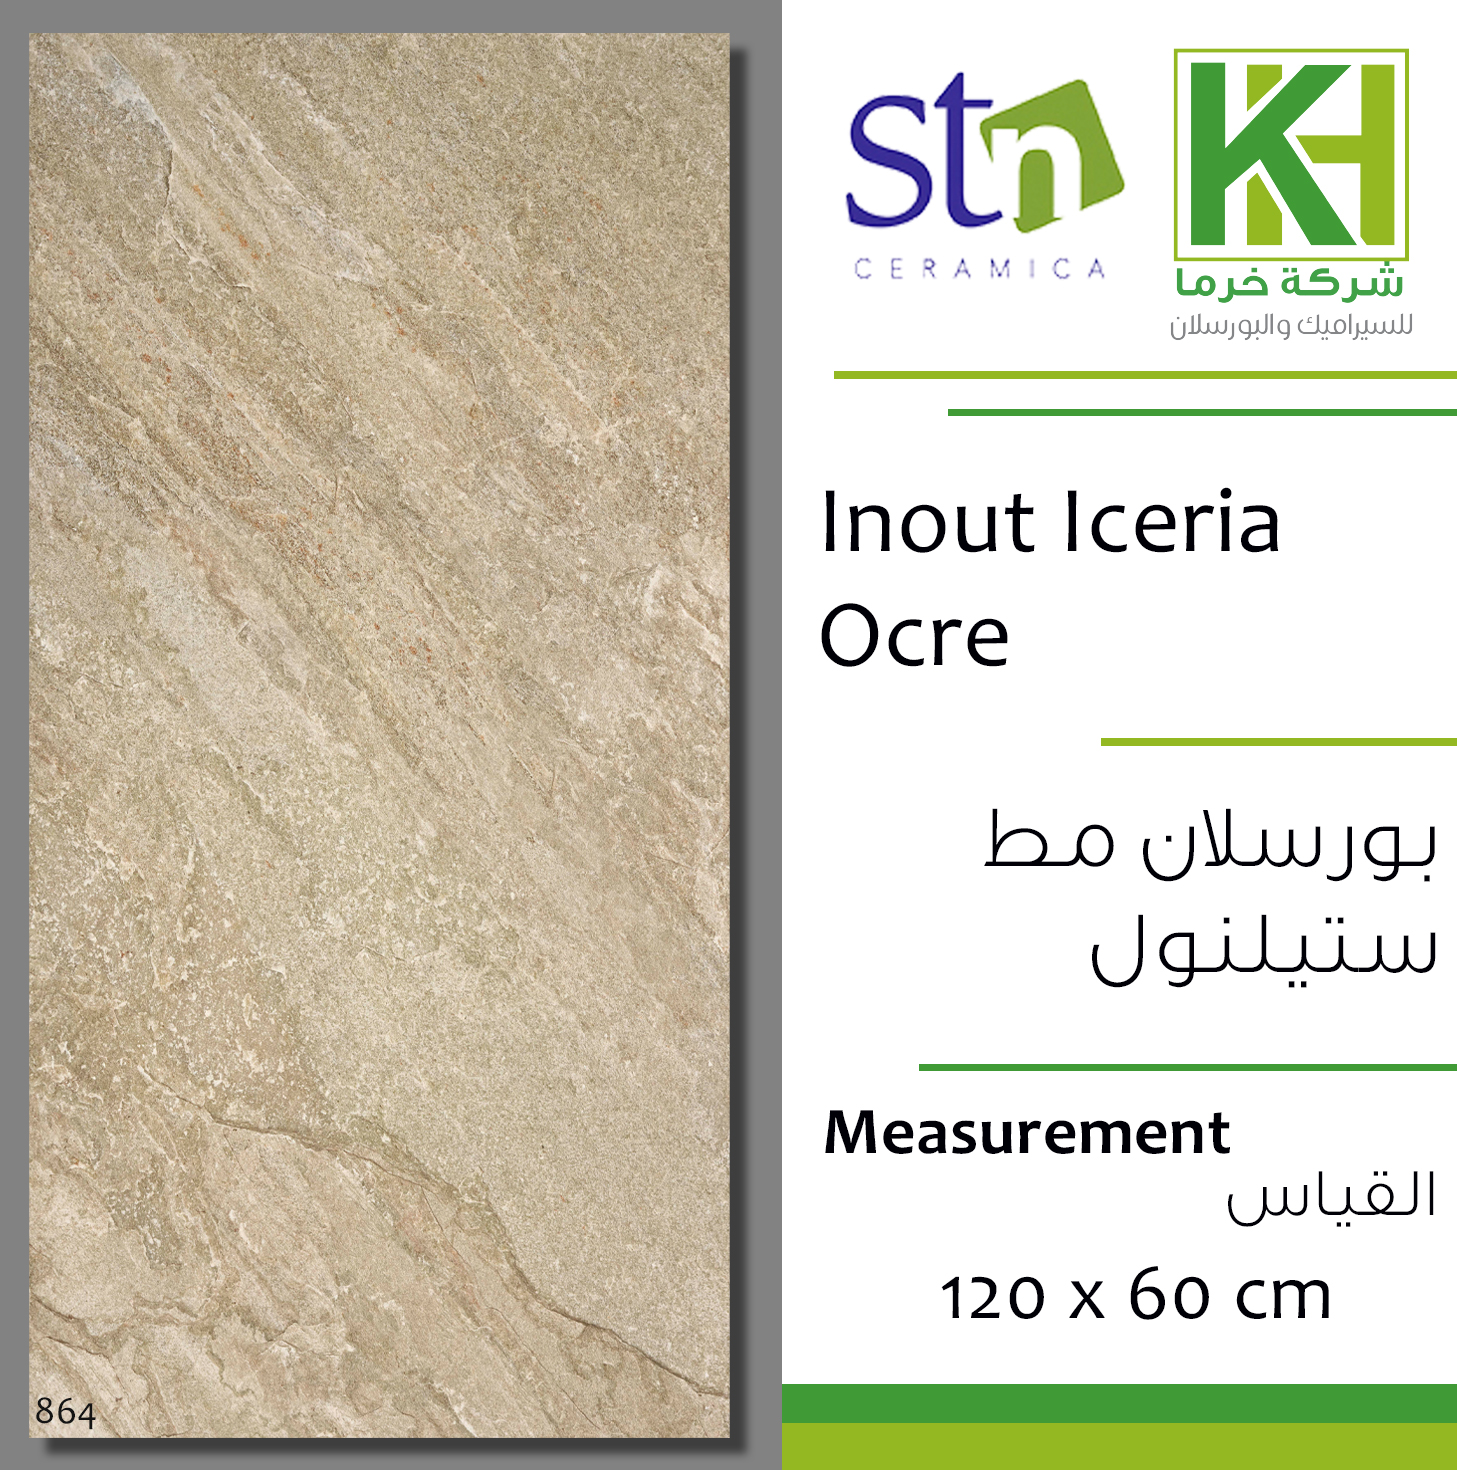 Picture of Spanish Porcelain tile 60x120cm Inout Icaria Ocre